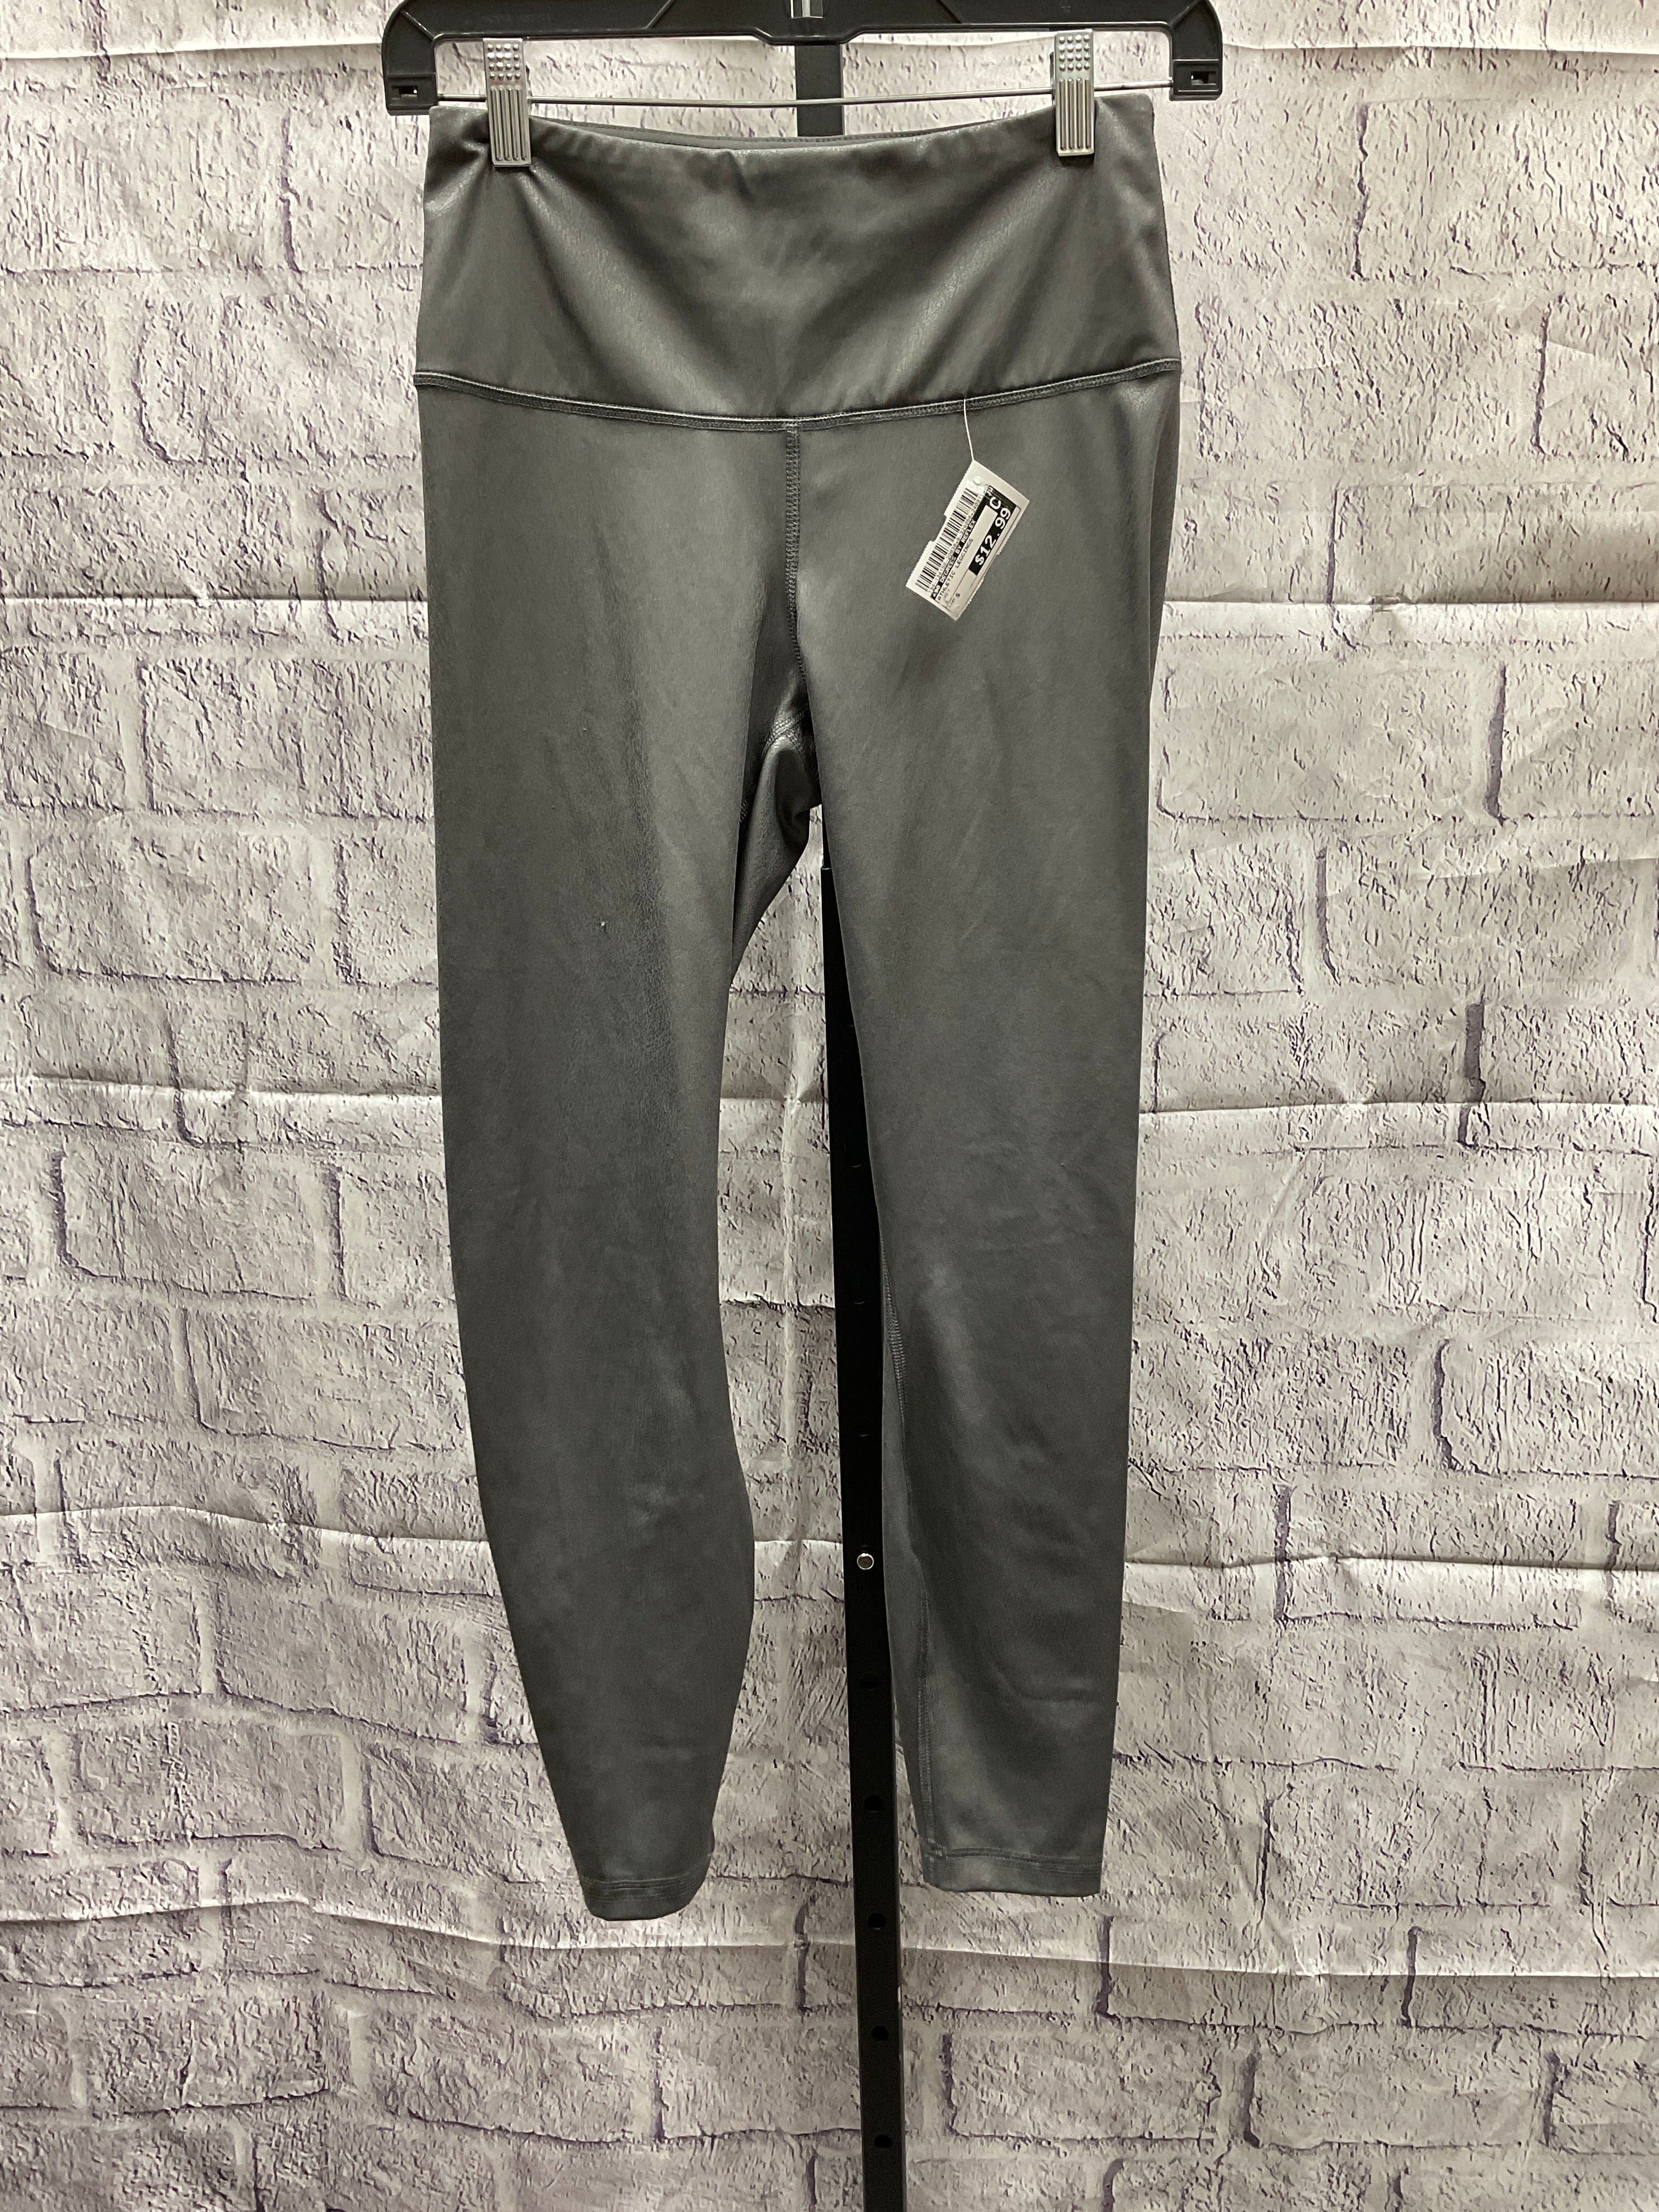 Athletic Leggings By 90 Degrees By Reflex Size: S